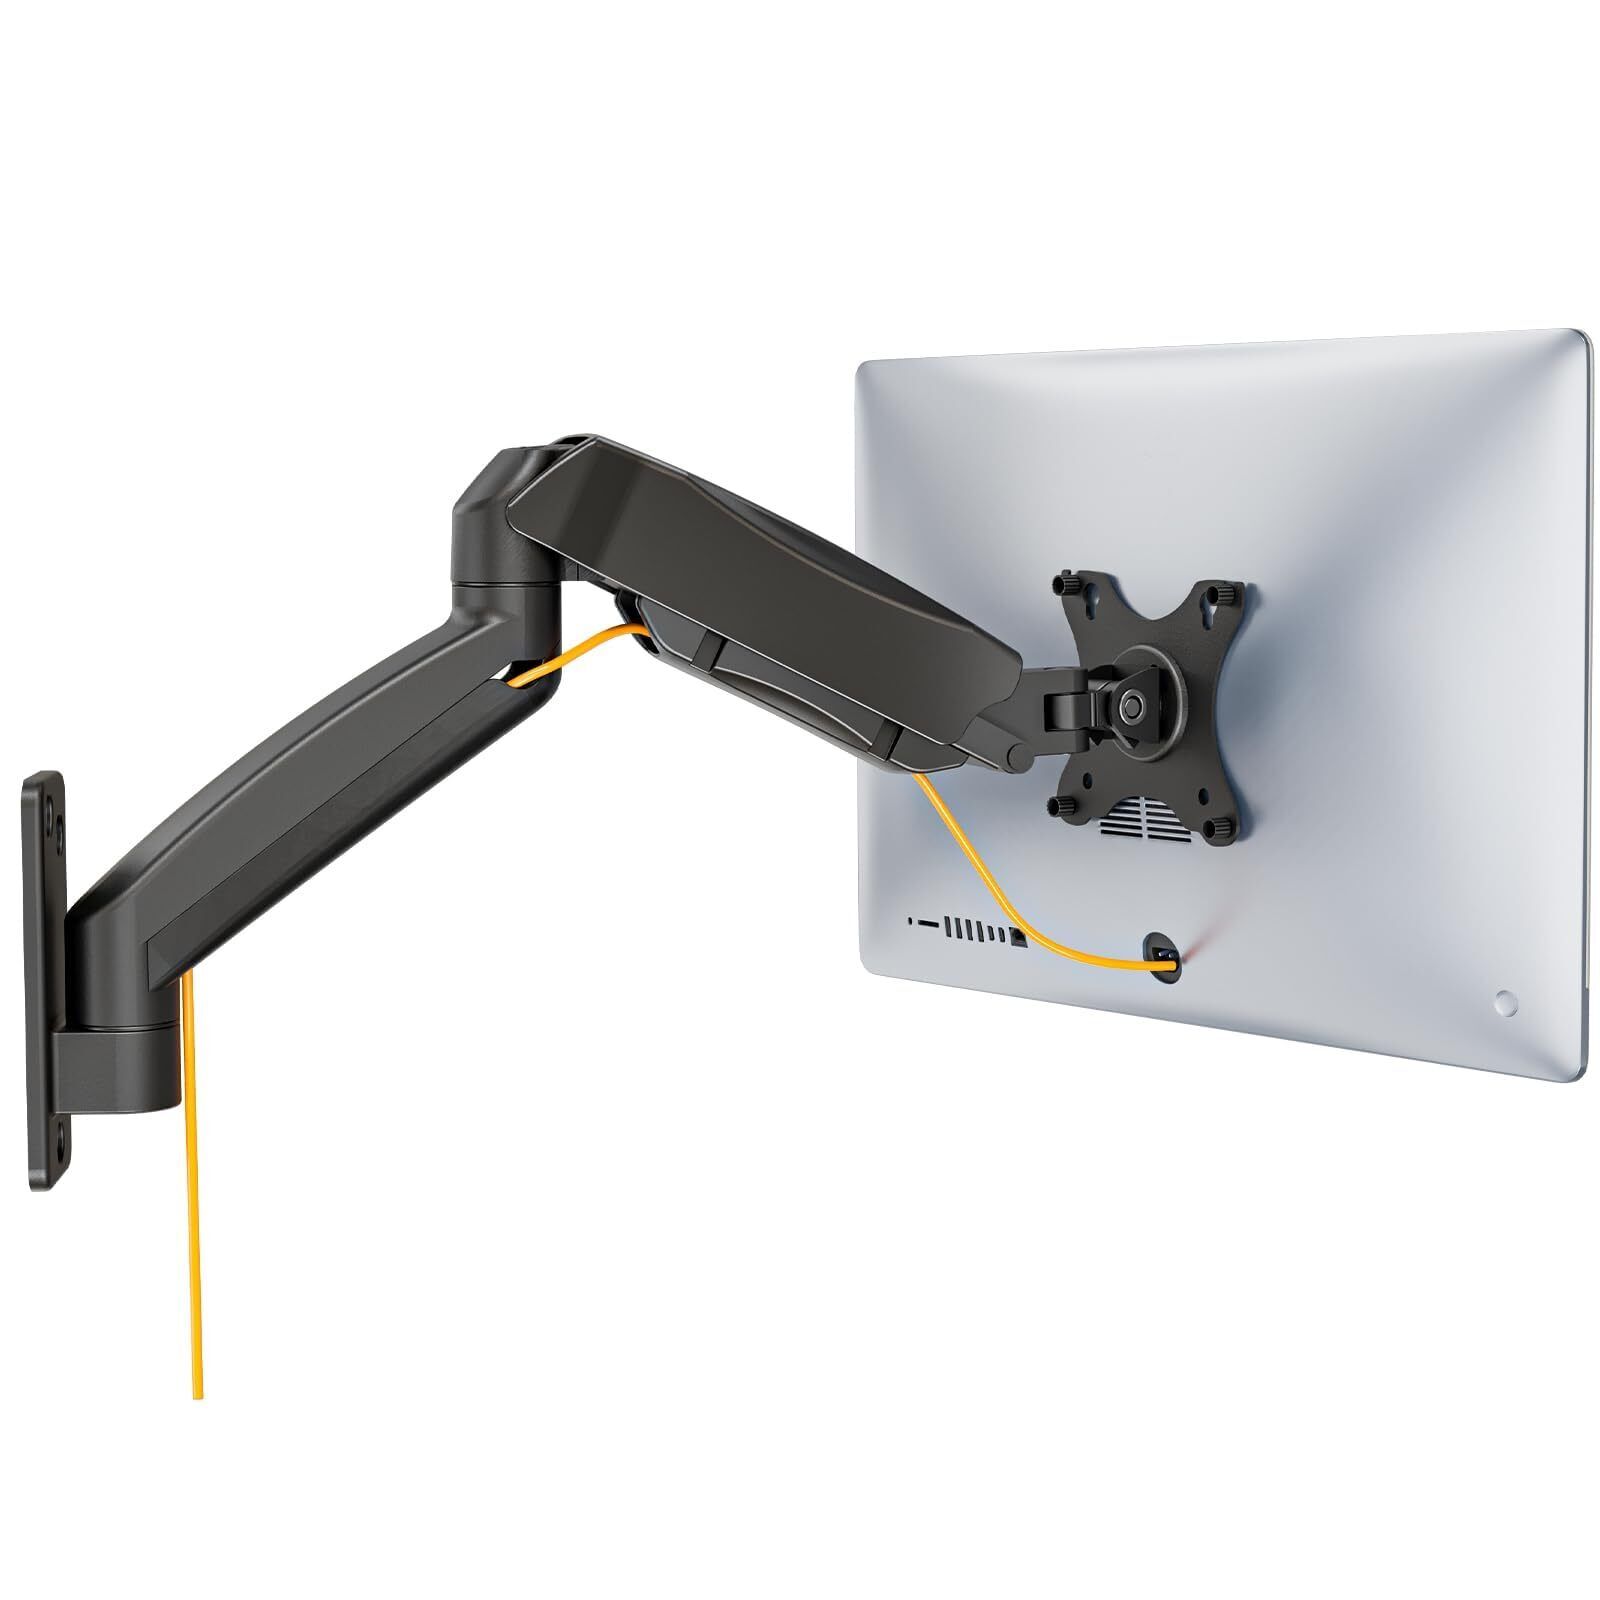 WALI Single Monitor Wall Mount, Gas Spring Monitor Arm for 1 Screen up to 32 ...